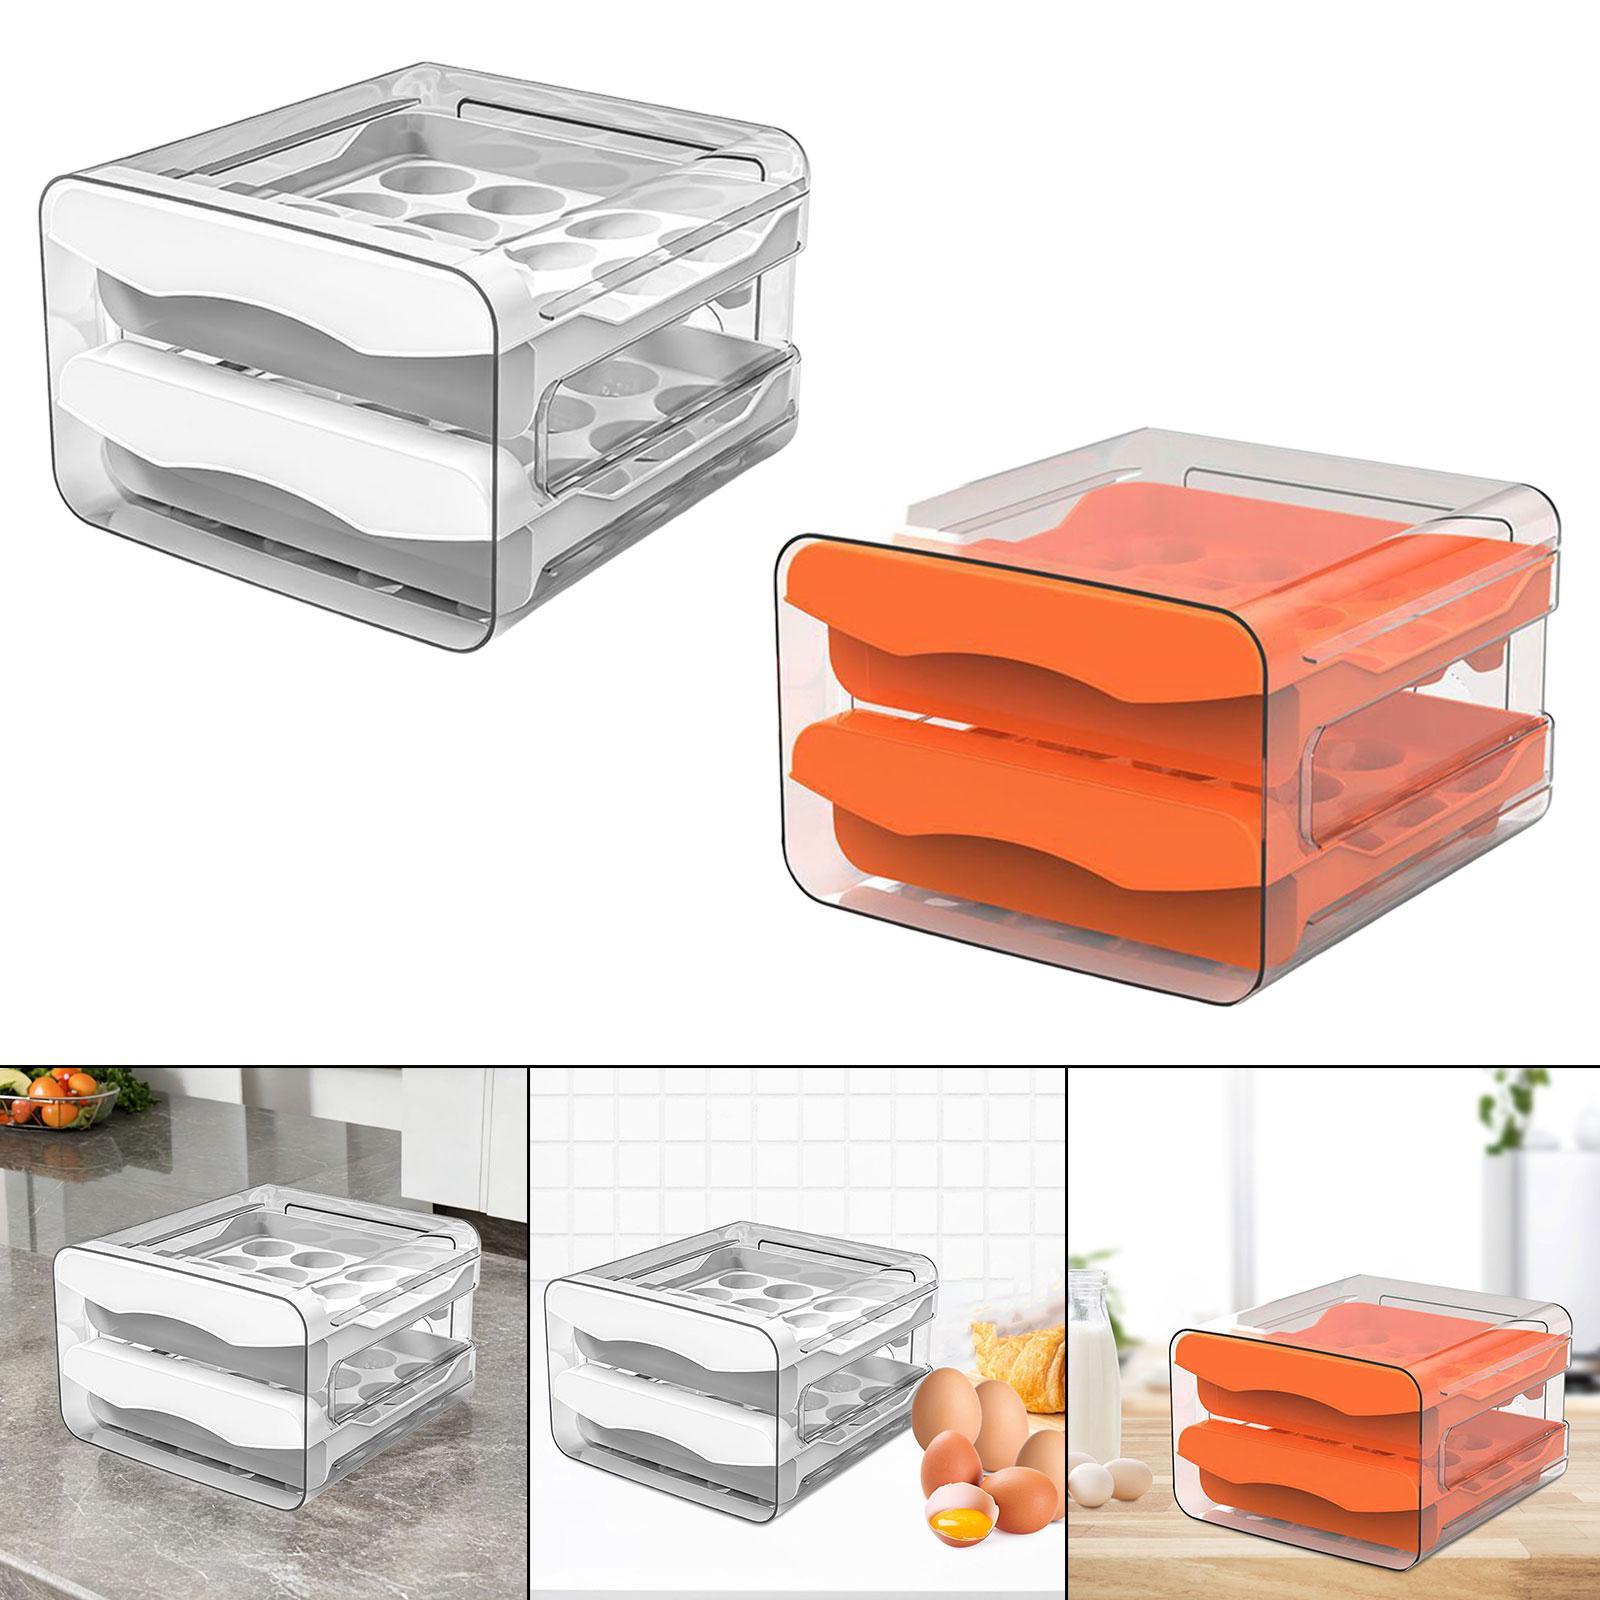 Egg Holder for Fridge Egg Fresh Storage Box Space Saving Large Capacity 2 Layers Egg Tray Egg Storage Container for for Kitchen Refrigerator